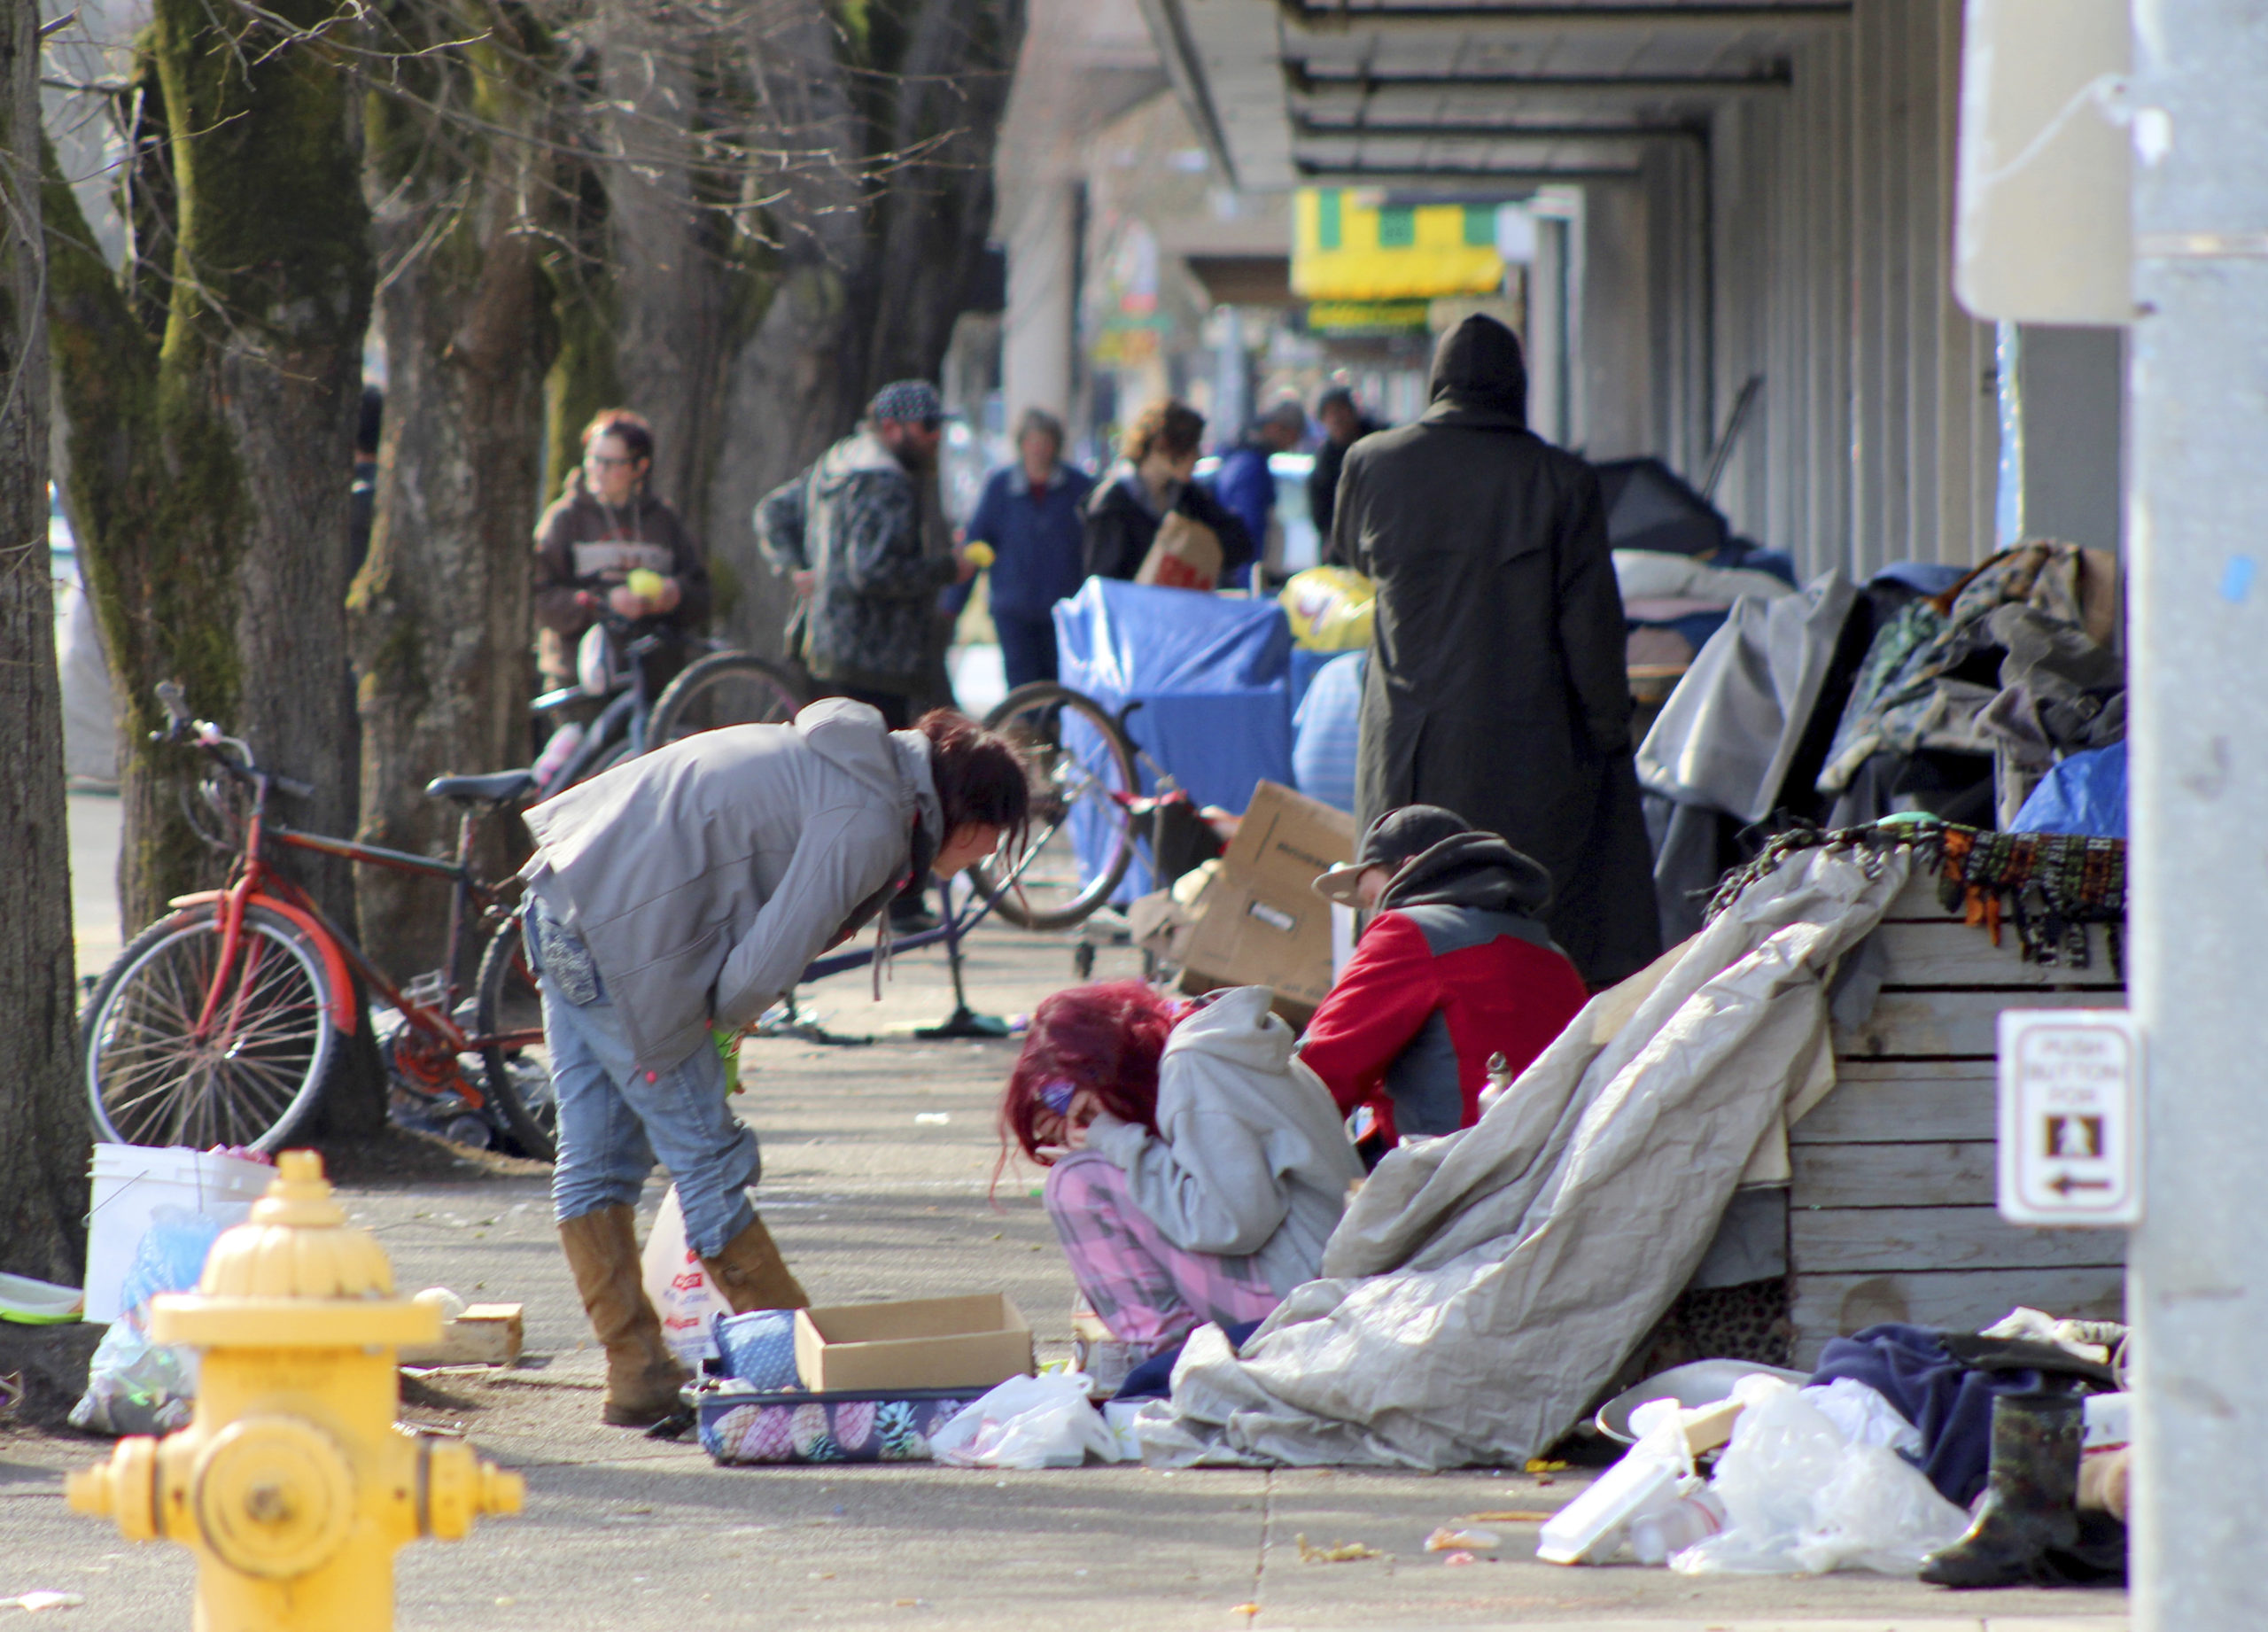 In this Tuesday, March 3, 2020 photo, homeless people crowd a sidewalk in downtown Salem, Ore., where they have set up a makeshift camp. Experts say that the homeless, who often have health and substance-abuse problems, are exposed to the elements and do not have easy access to hygiene, are more vulnerable to the coronavirus. Some cities are making provisions so the homeless who contract the virus have a place to recover without spreading the infection further. (AP Photo/Andrew Selsky)